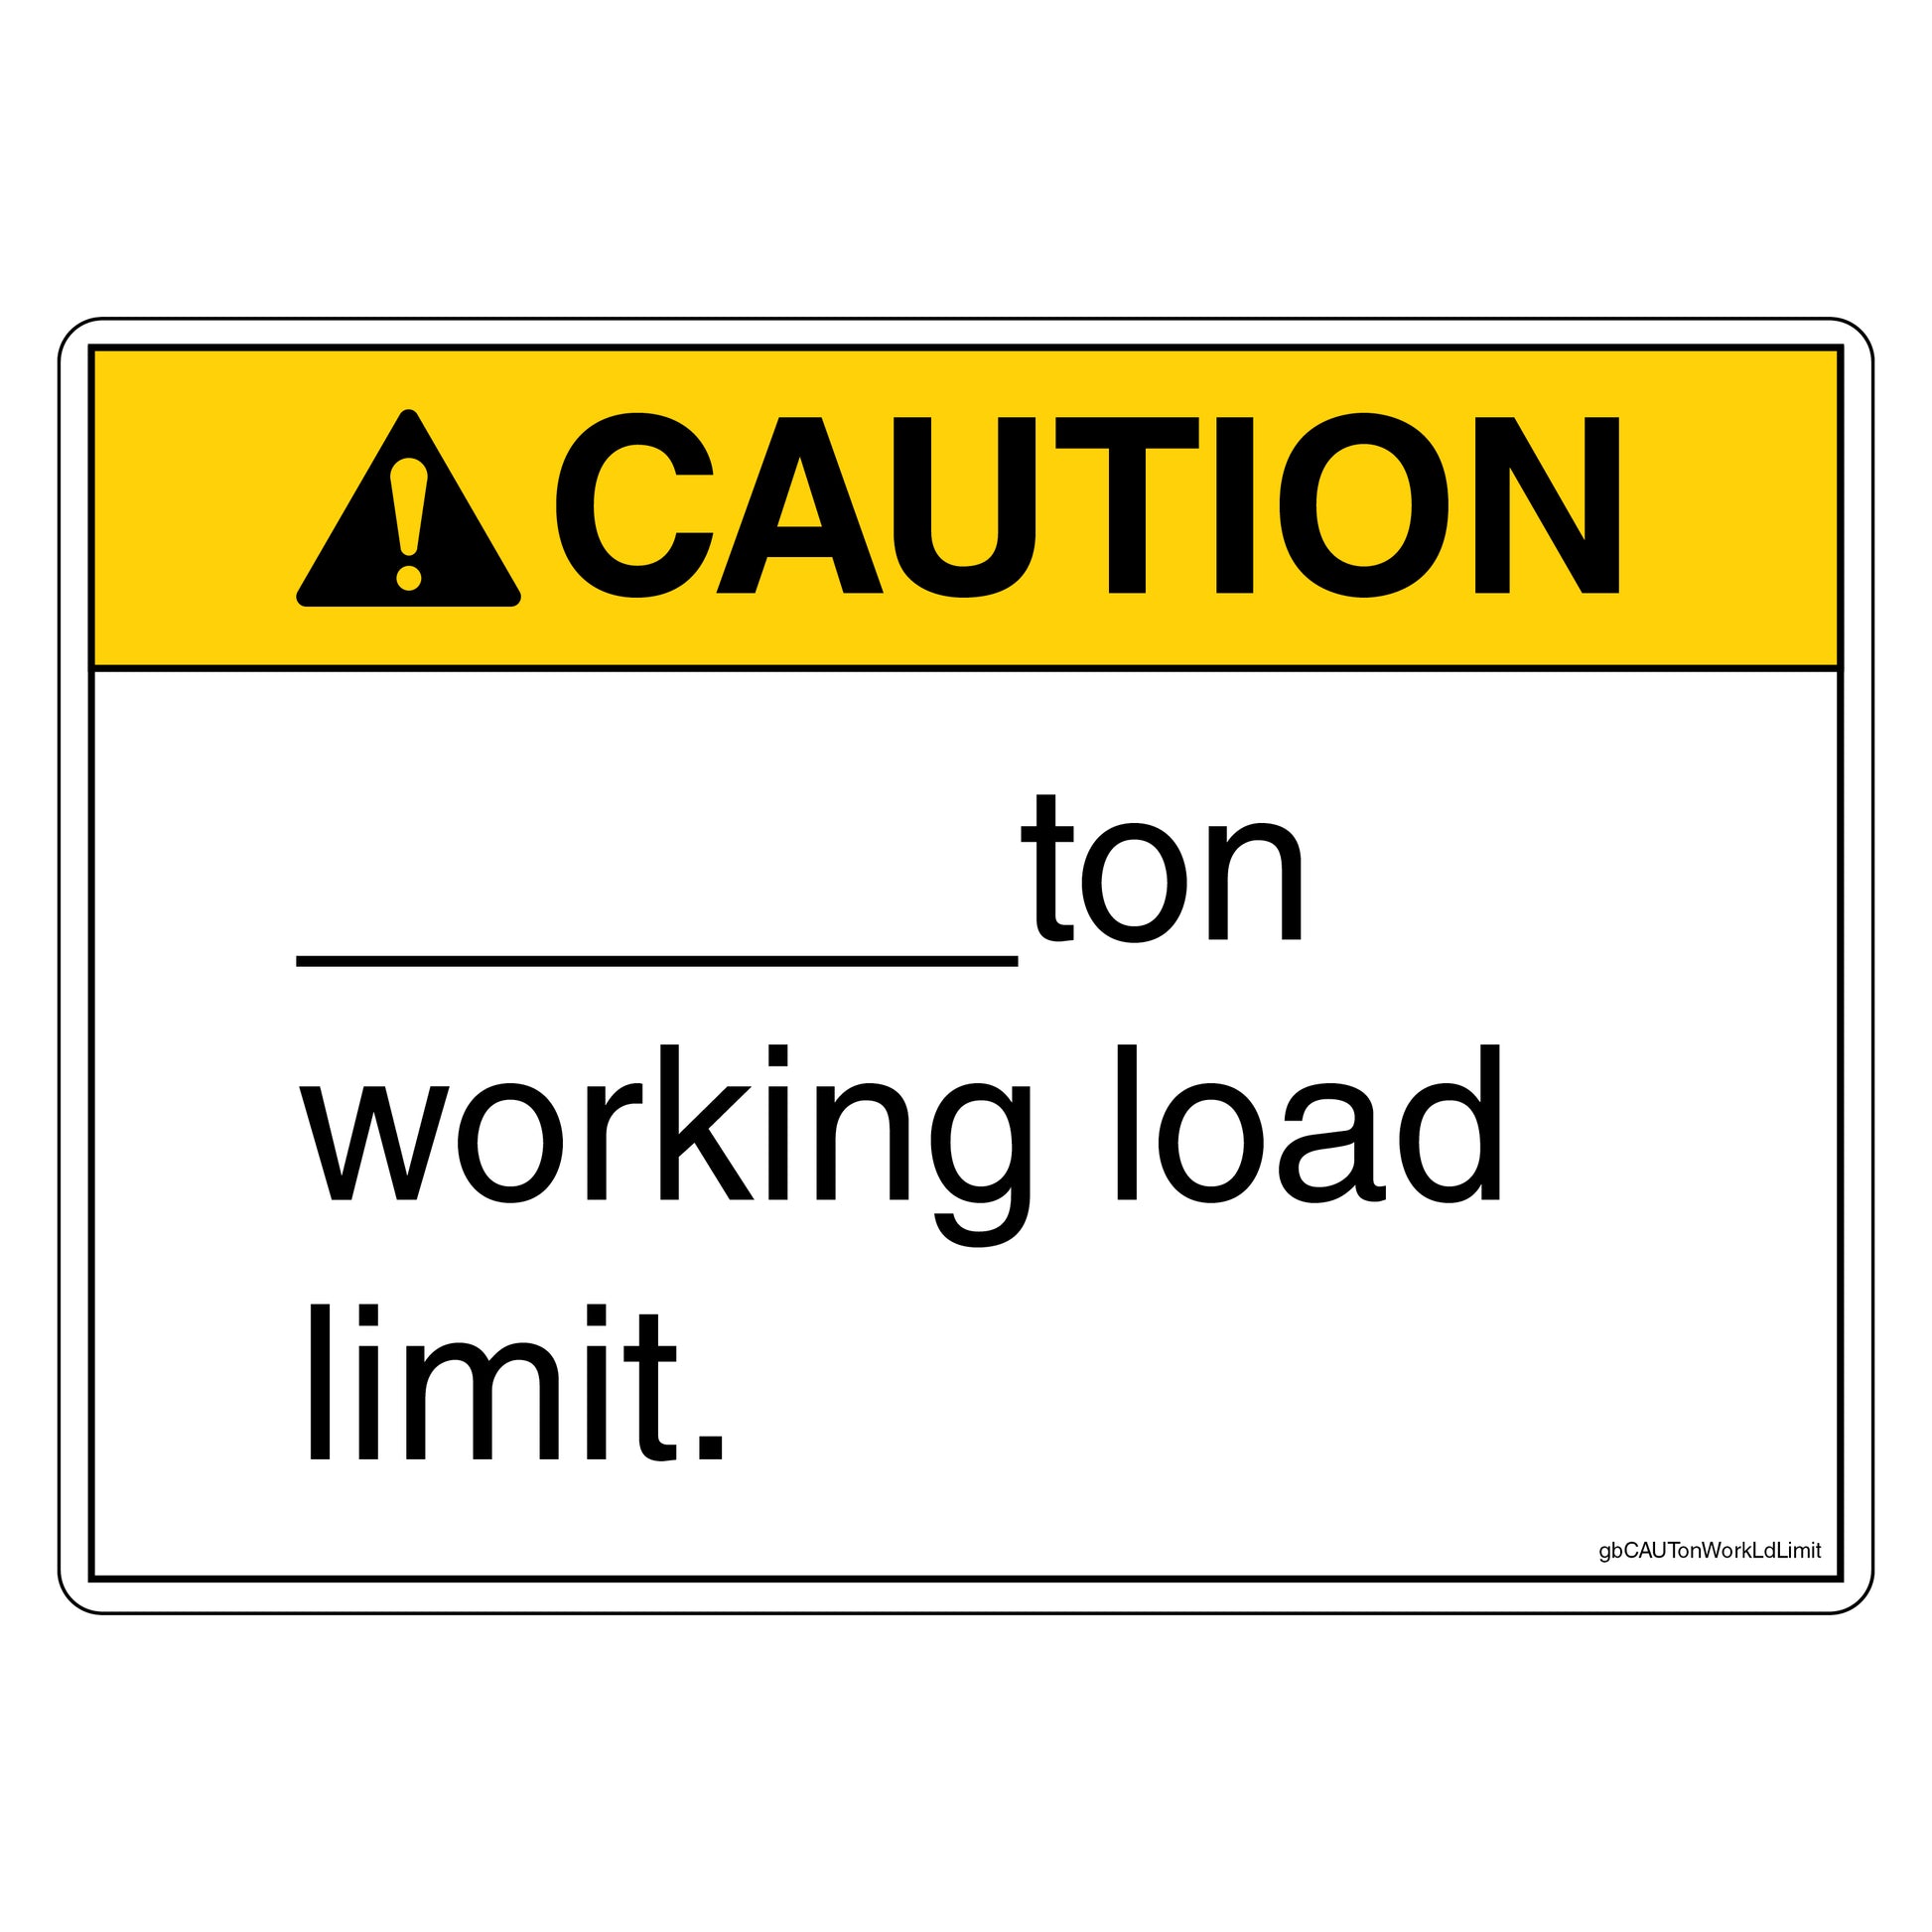 Caution Working Load Limit in Ton Decal. Blank for customization. 